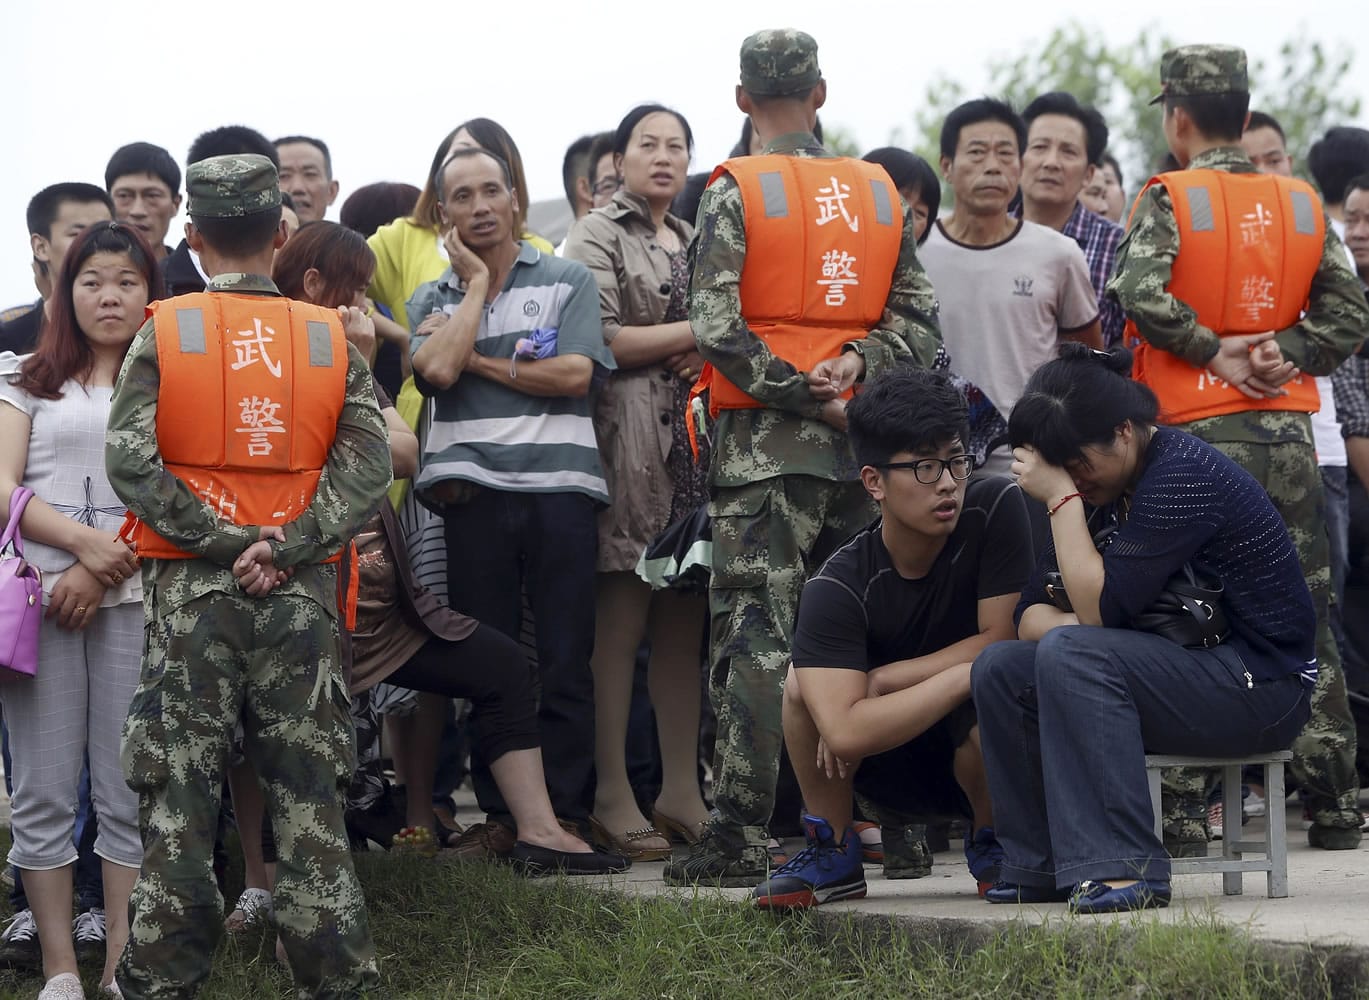 Chinatopix via AP
A woman, right, whose parents were onboard the capsized cruise ship, grieves along the Yangtze River on Wednesday near Jianli, China, as paramilitary policemen stand guard to prevent people from getting near rescue efforts.